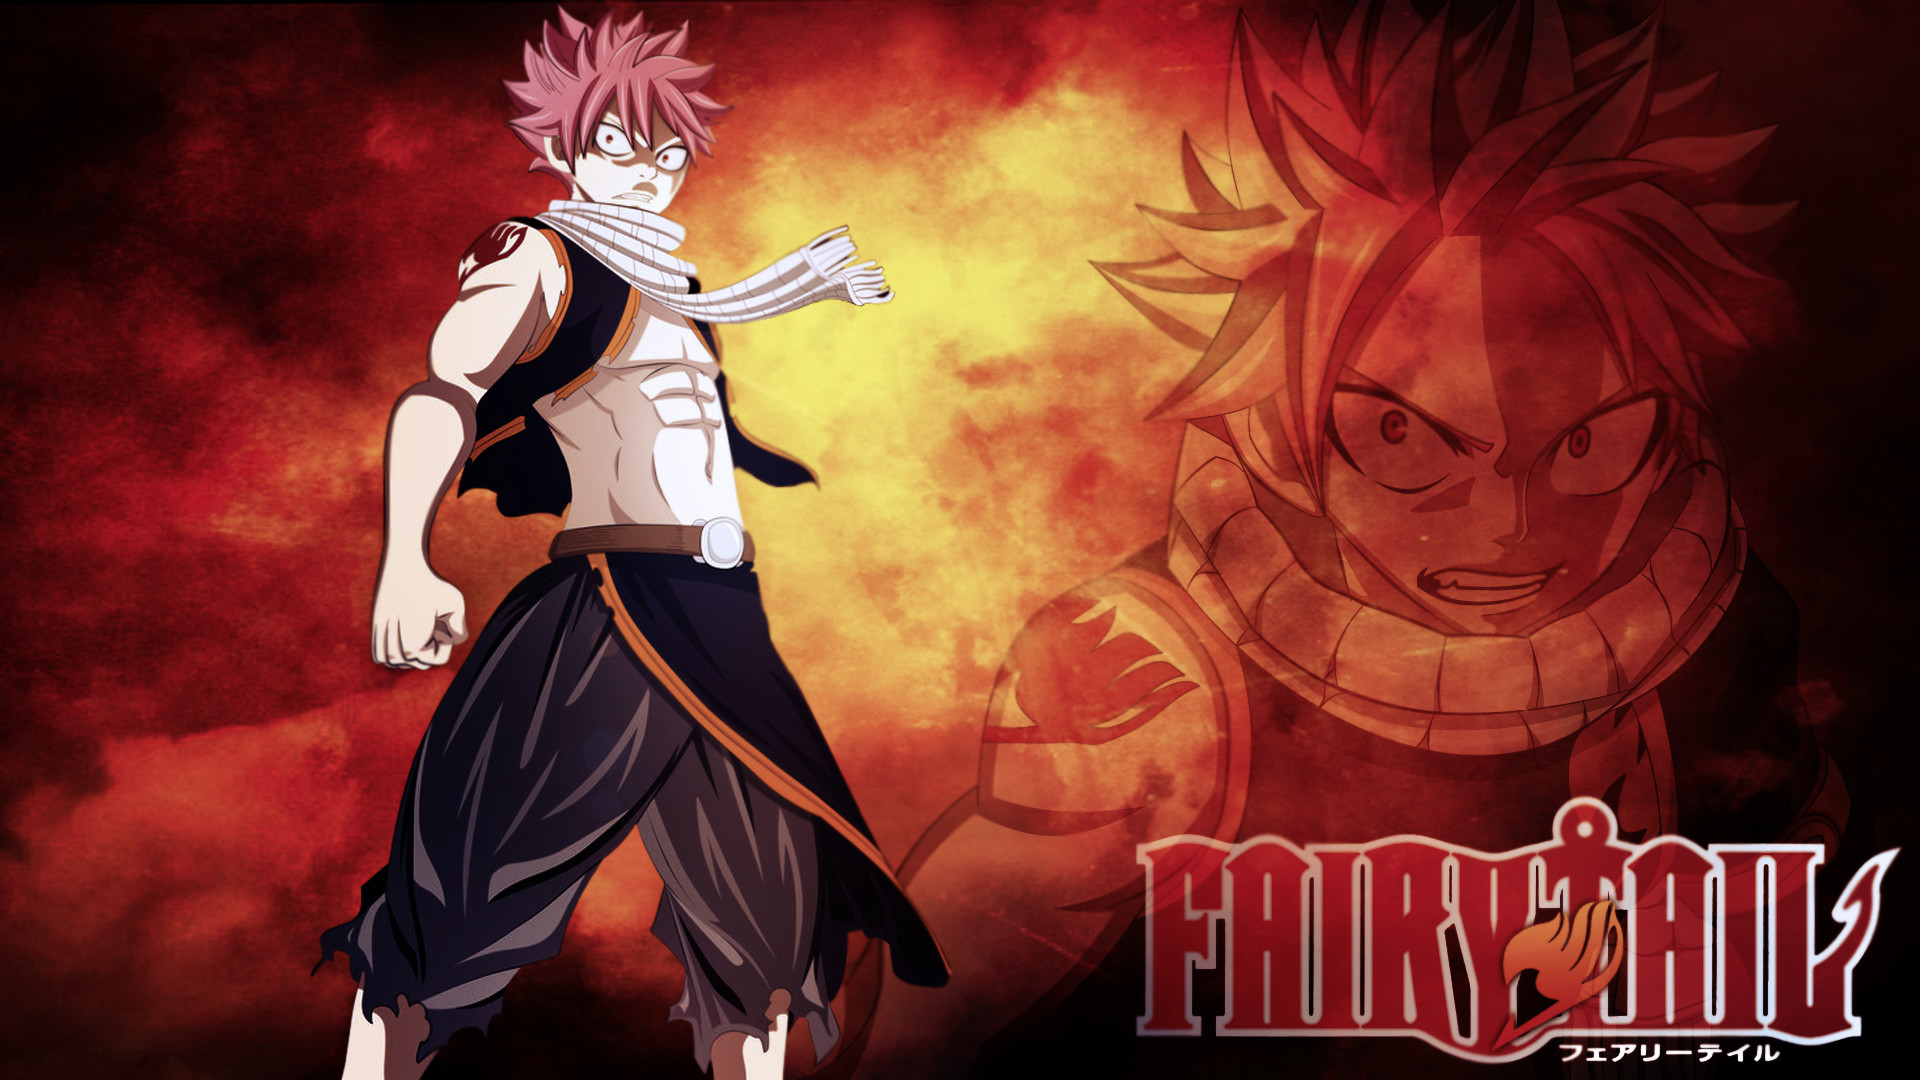 1920x1080 Fairy Tail Wallpaper Background HD 5910 Wallpaper Cool 